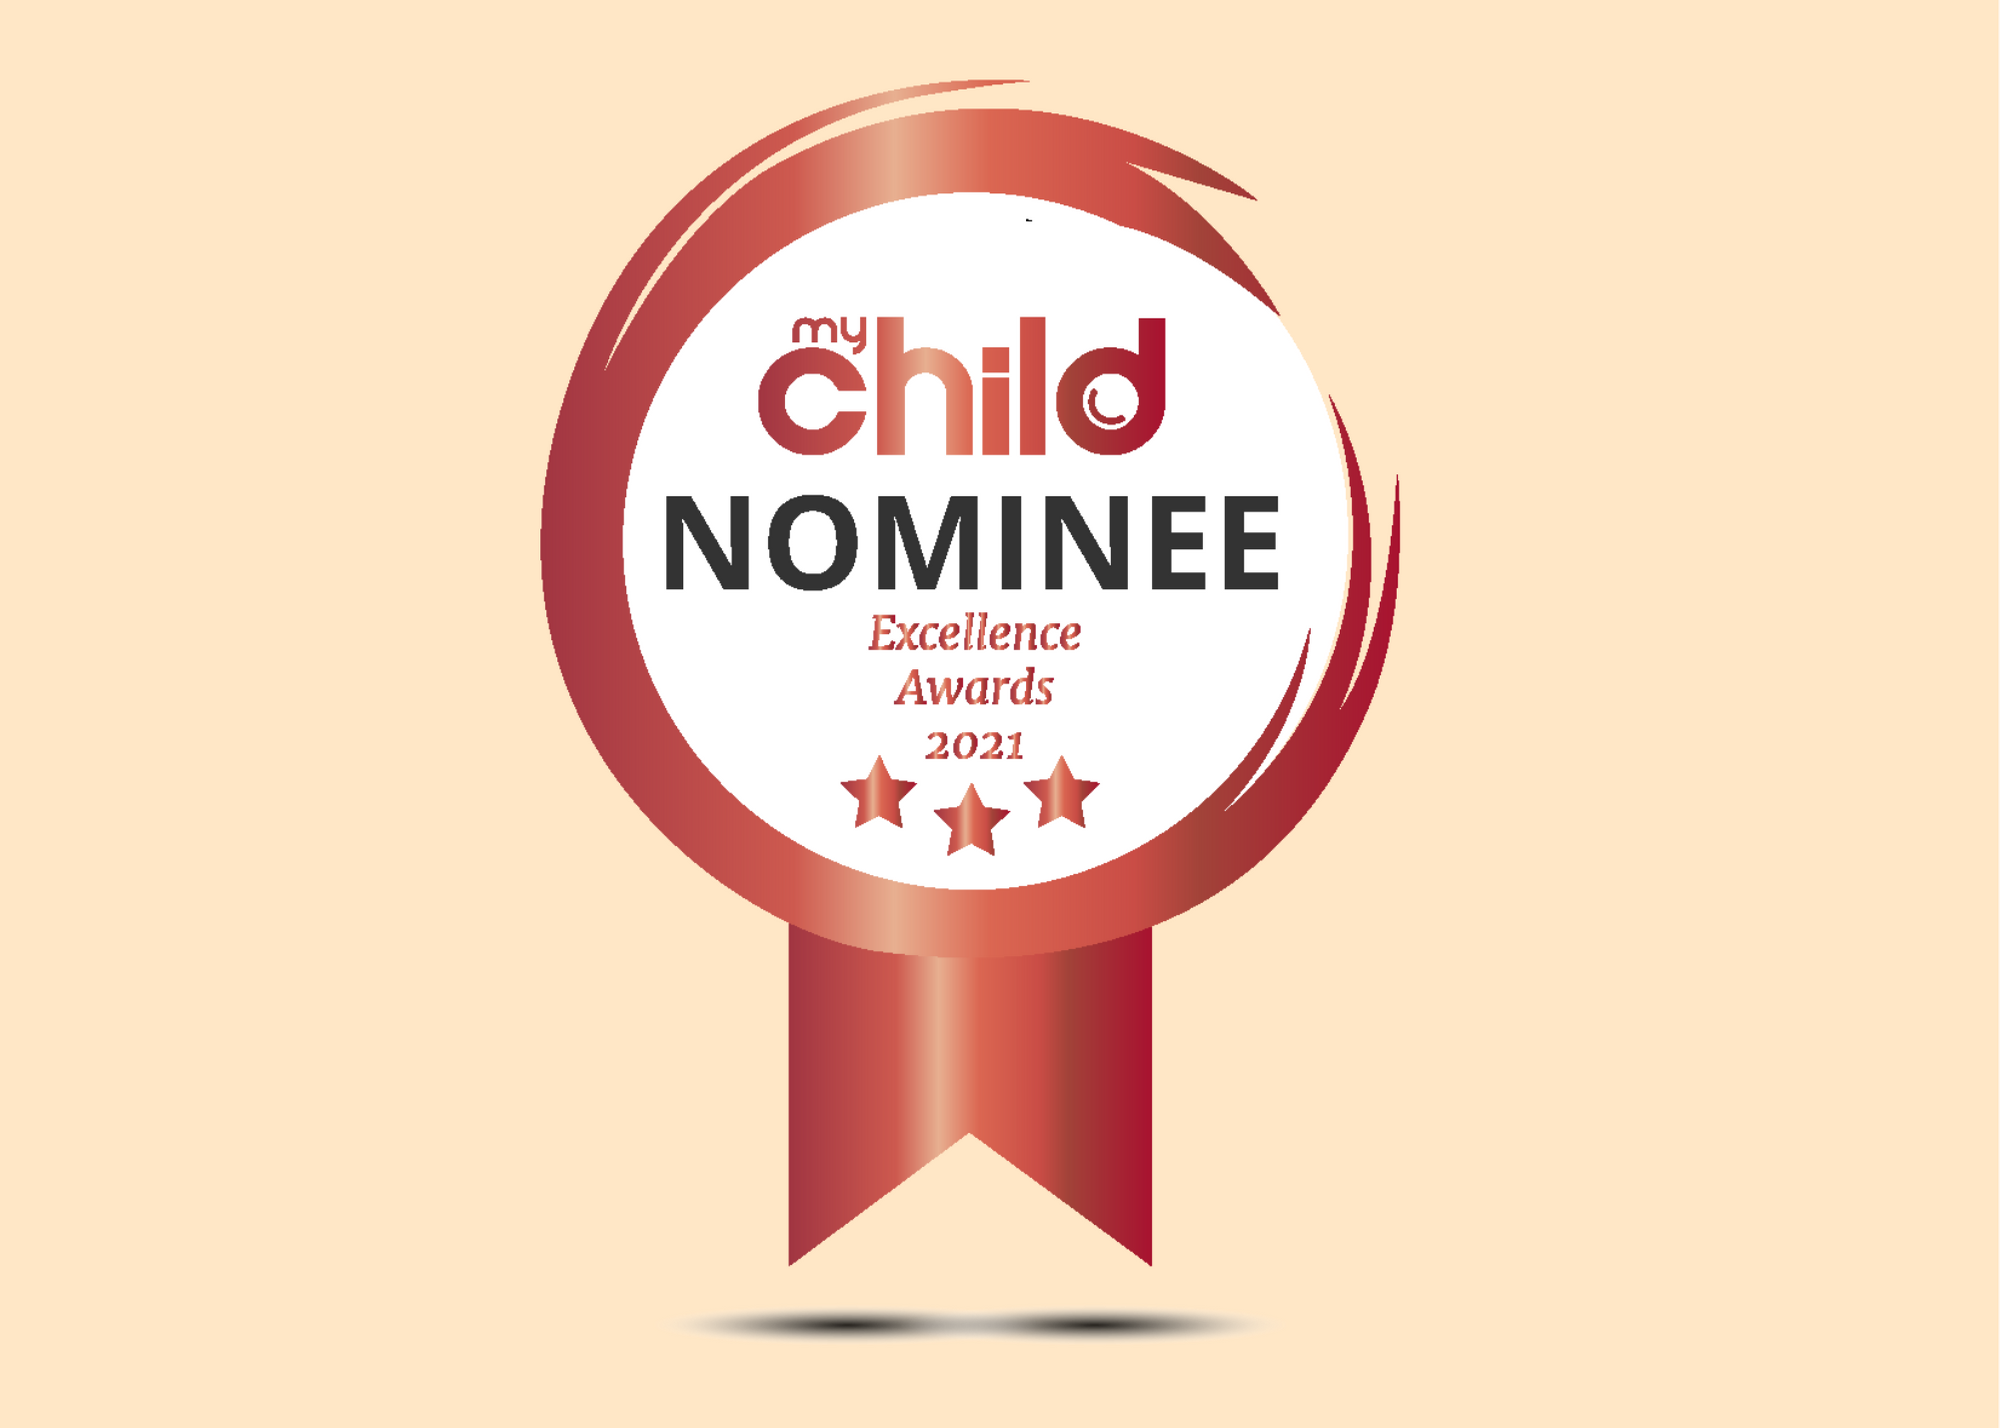 Mizzie The Kangaroo Nominated in MyChild Excellence Awards 2021